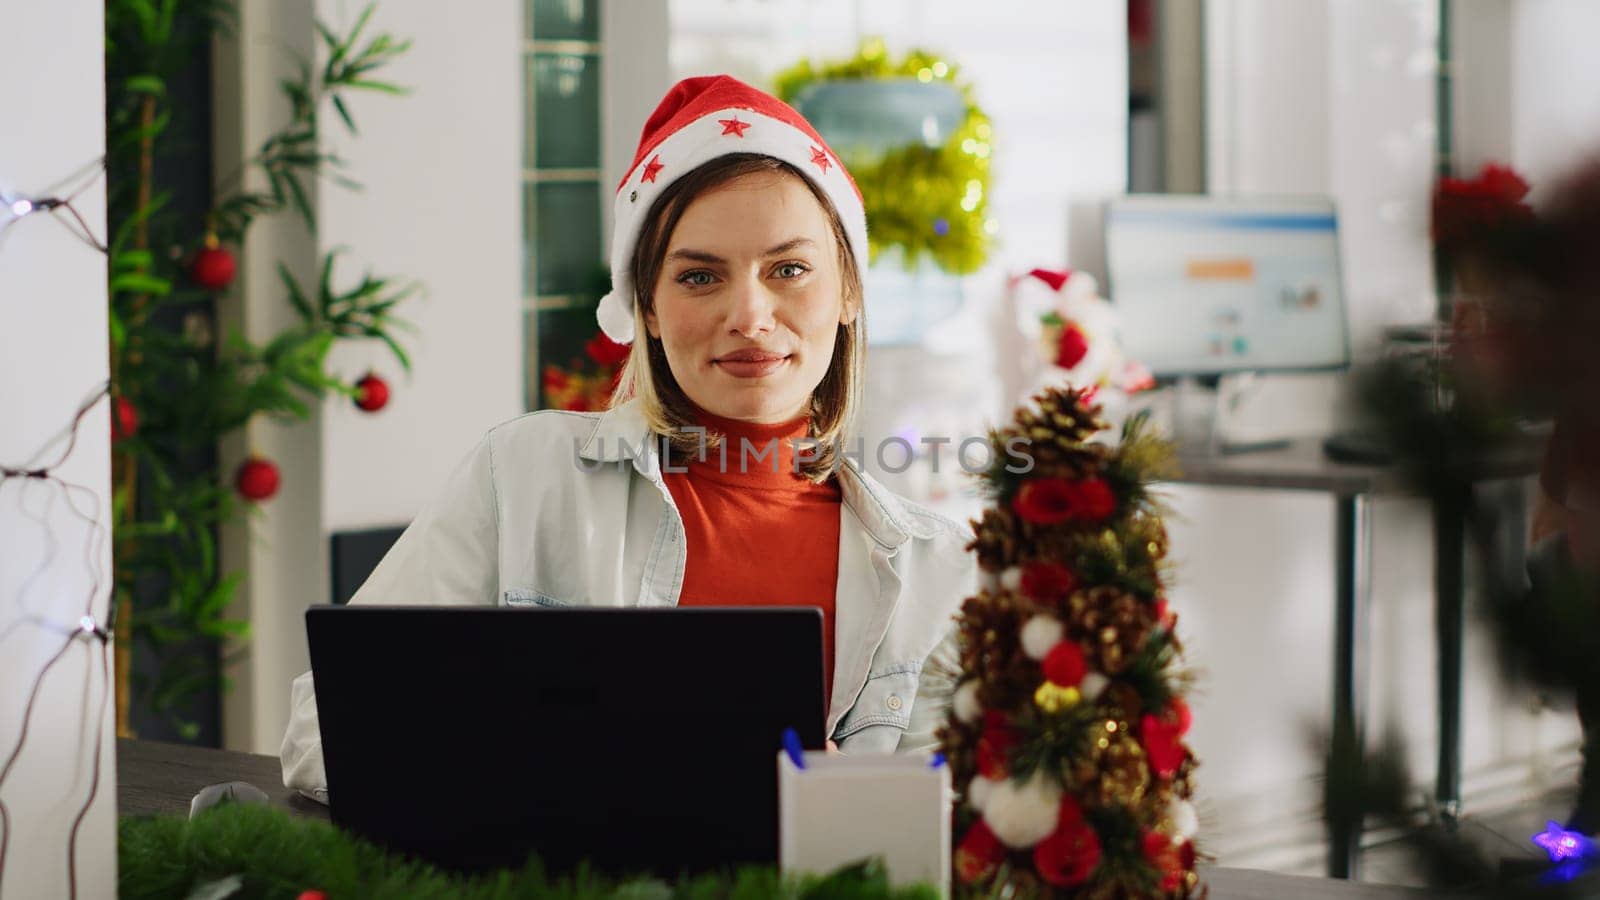 Bookkeeper in office during xmas by DCStudio